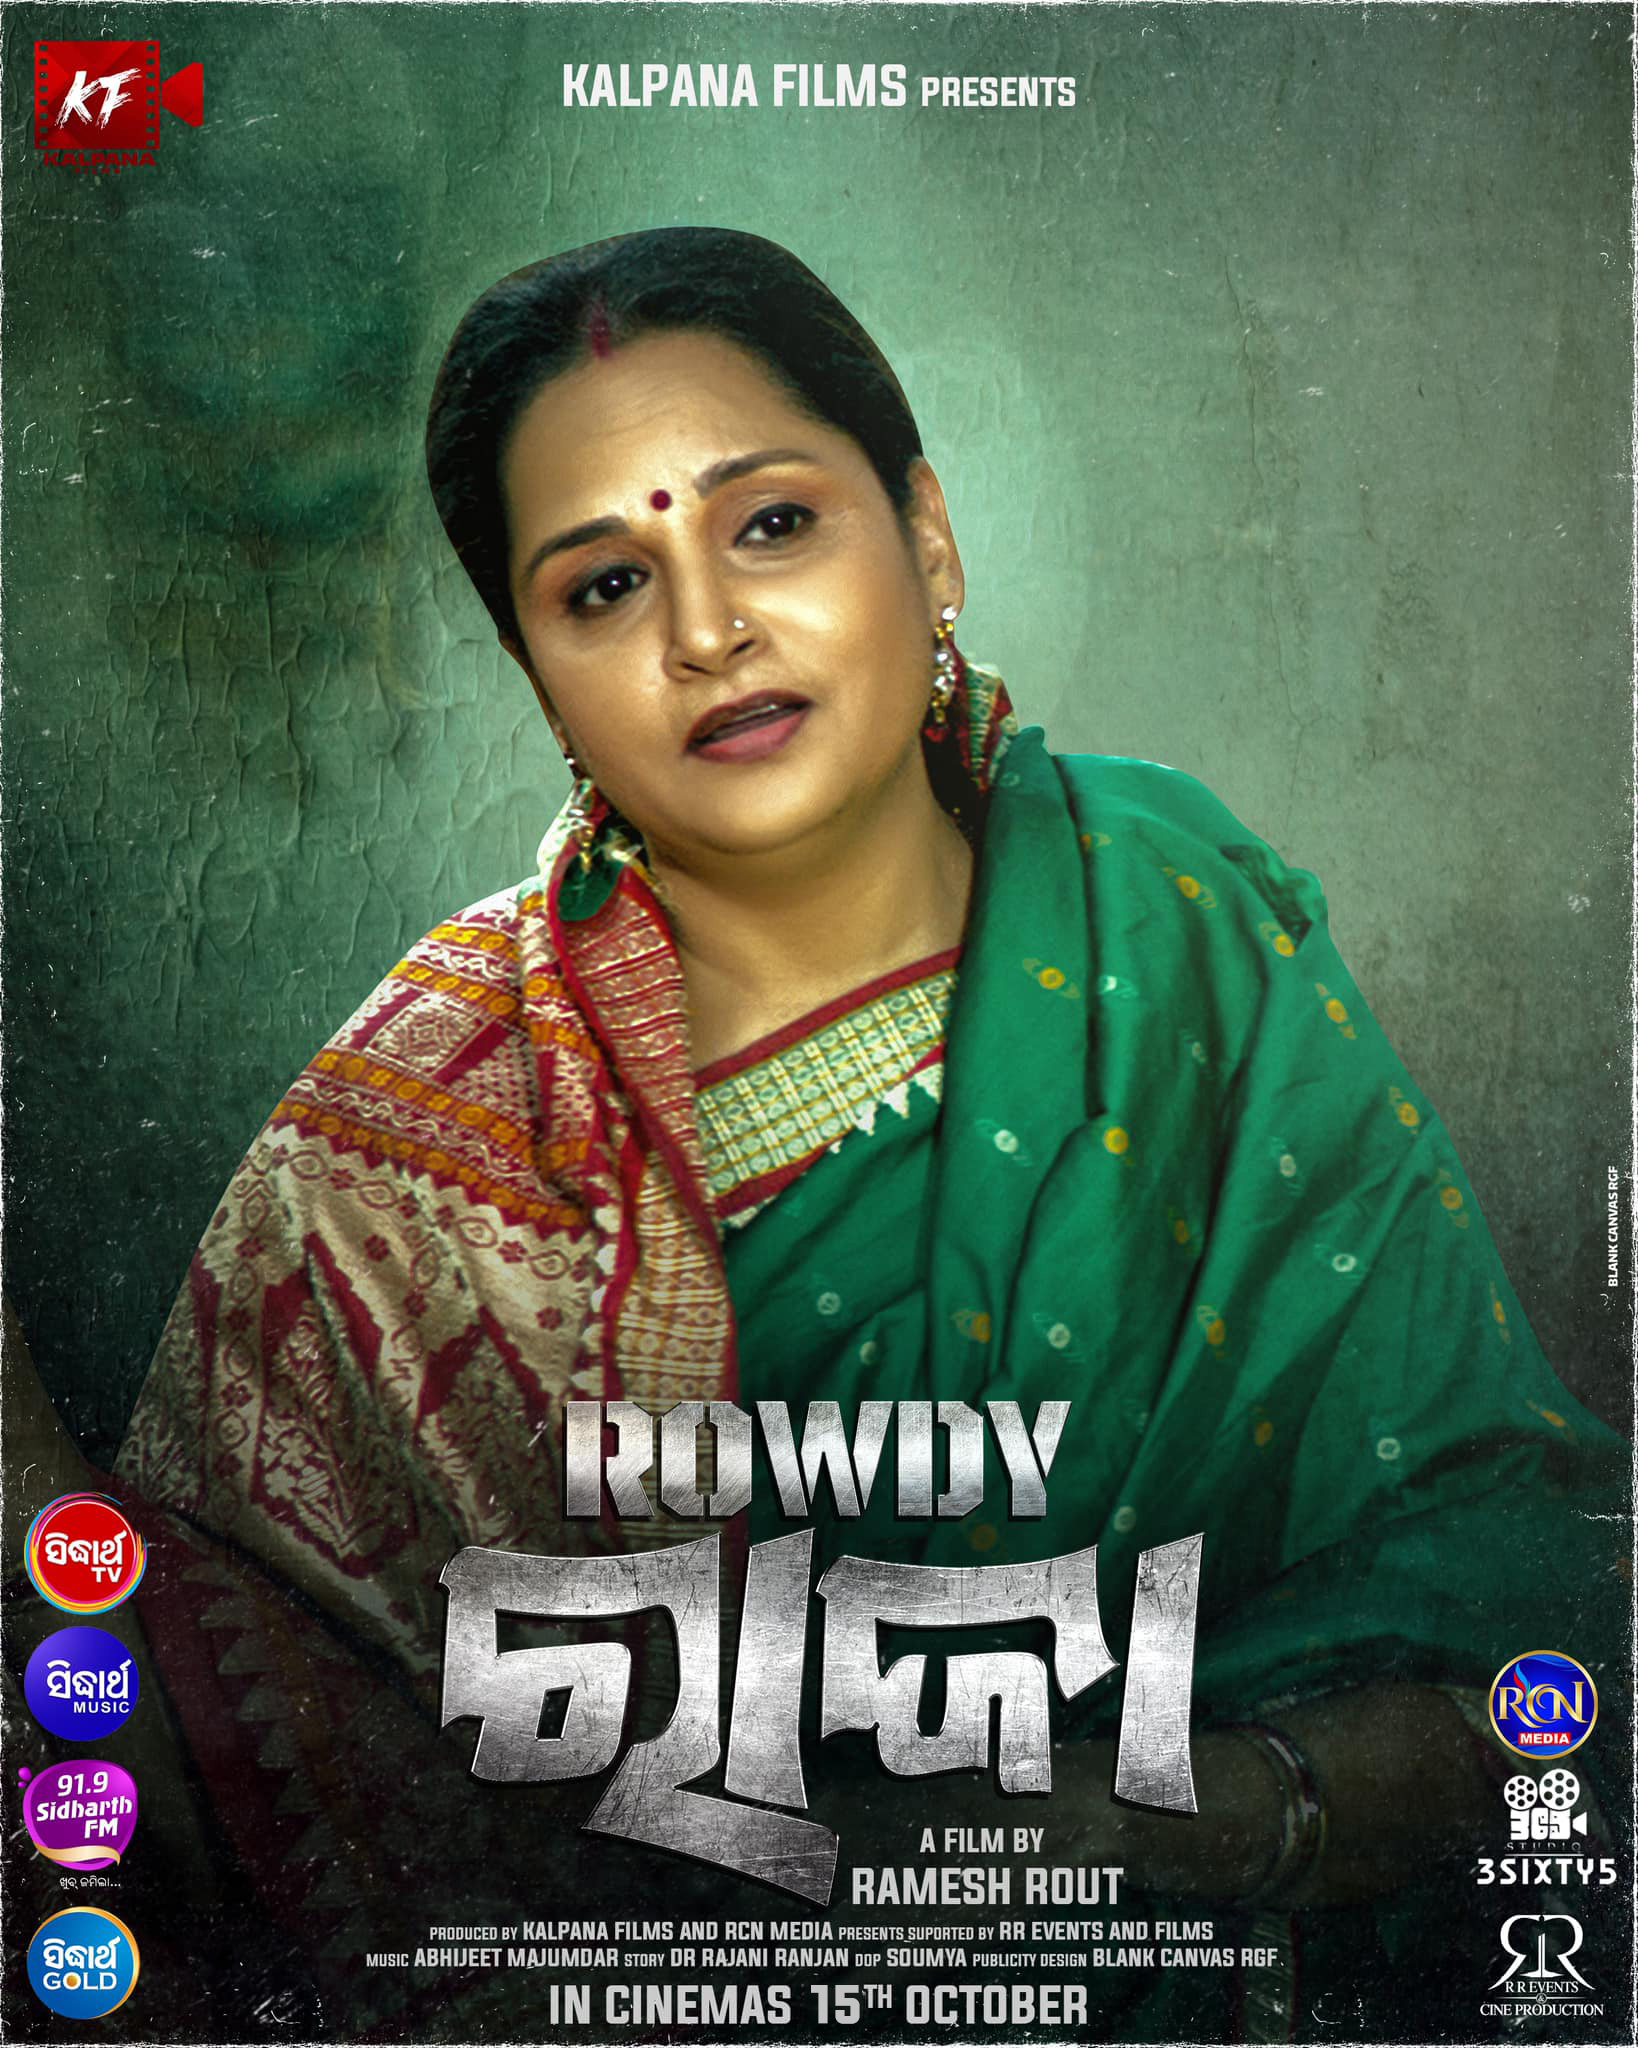 'Rowdy Raja' official poster